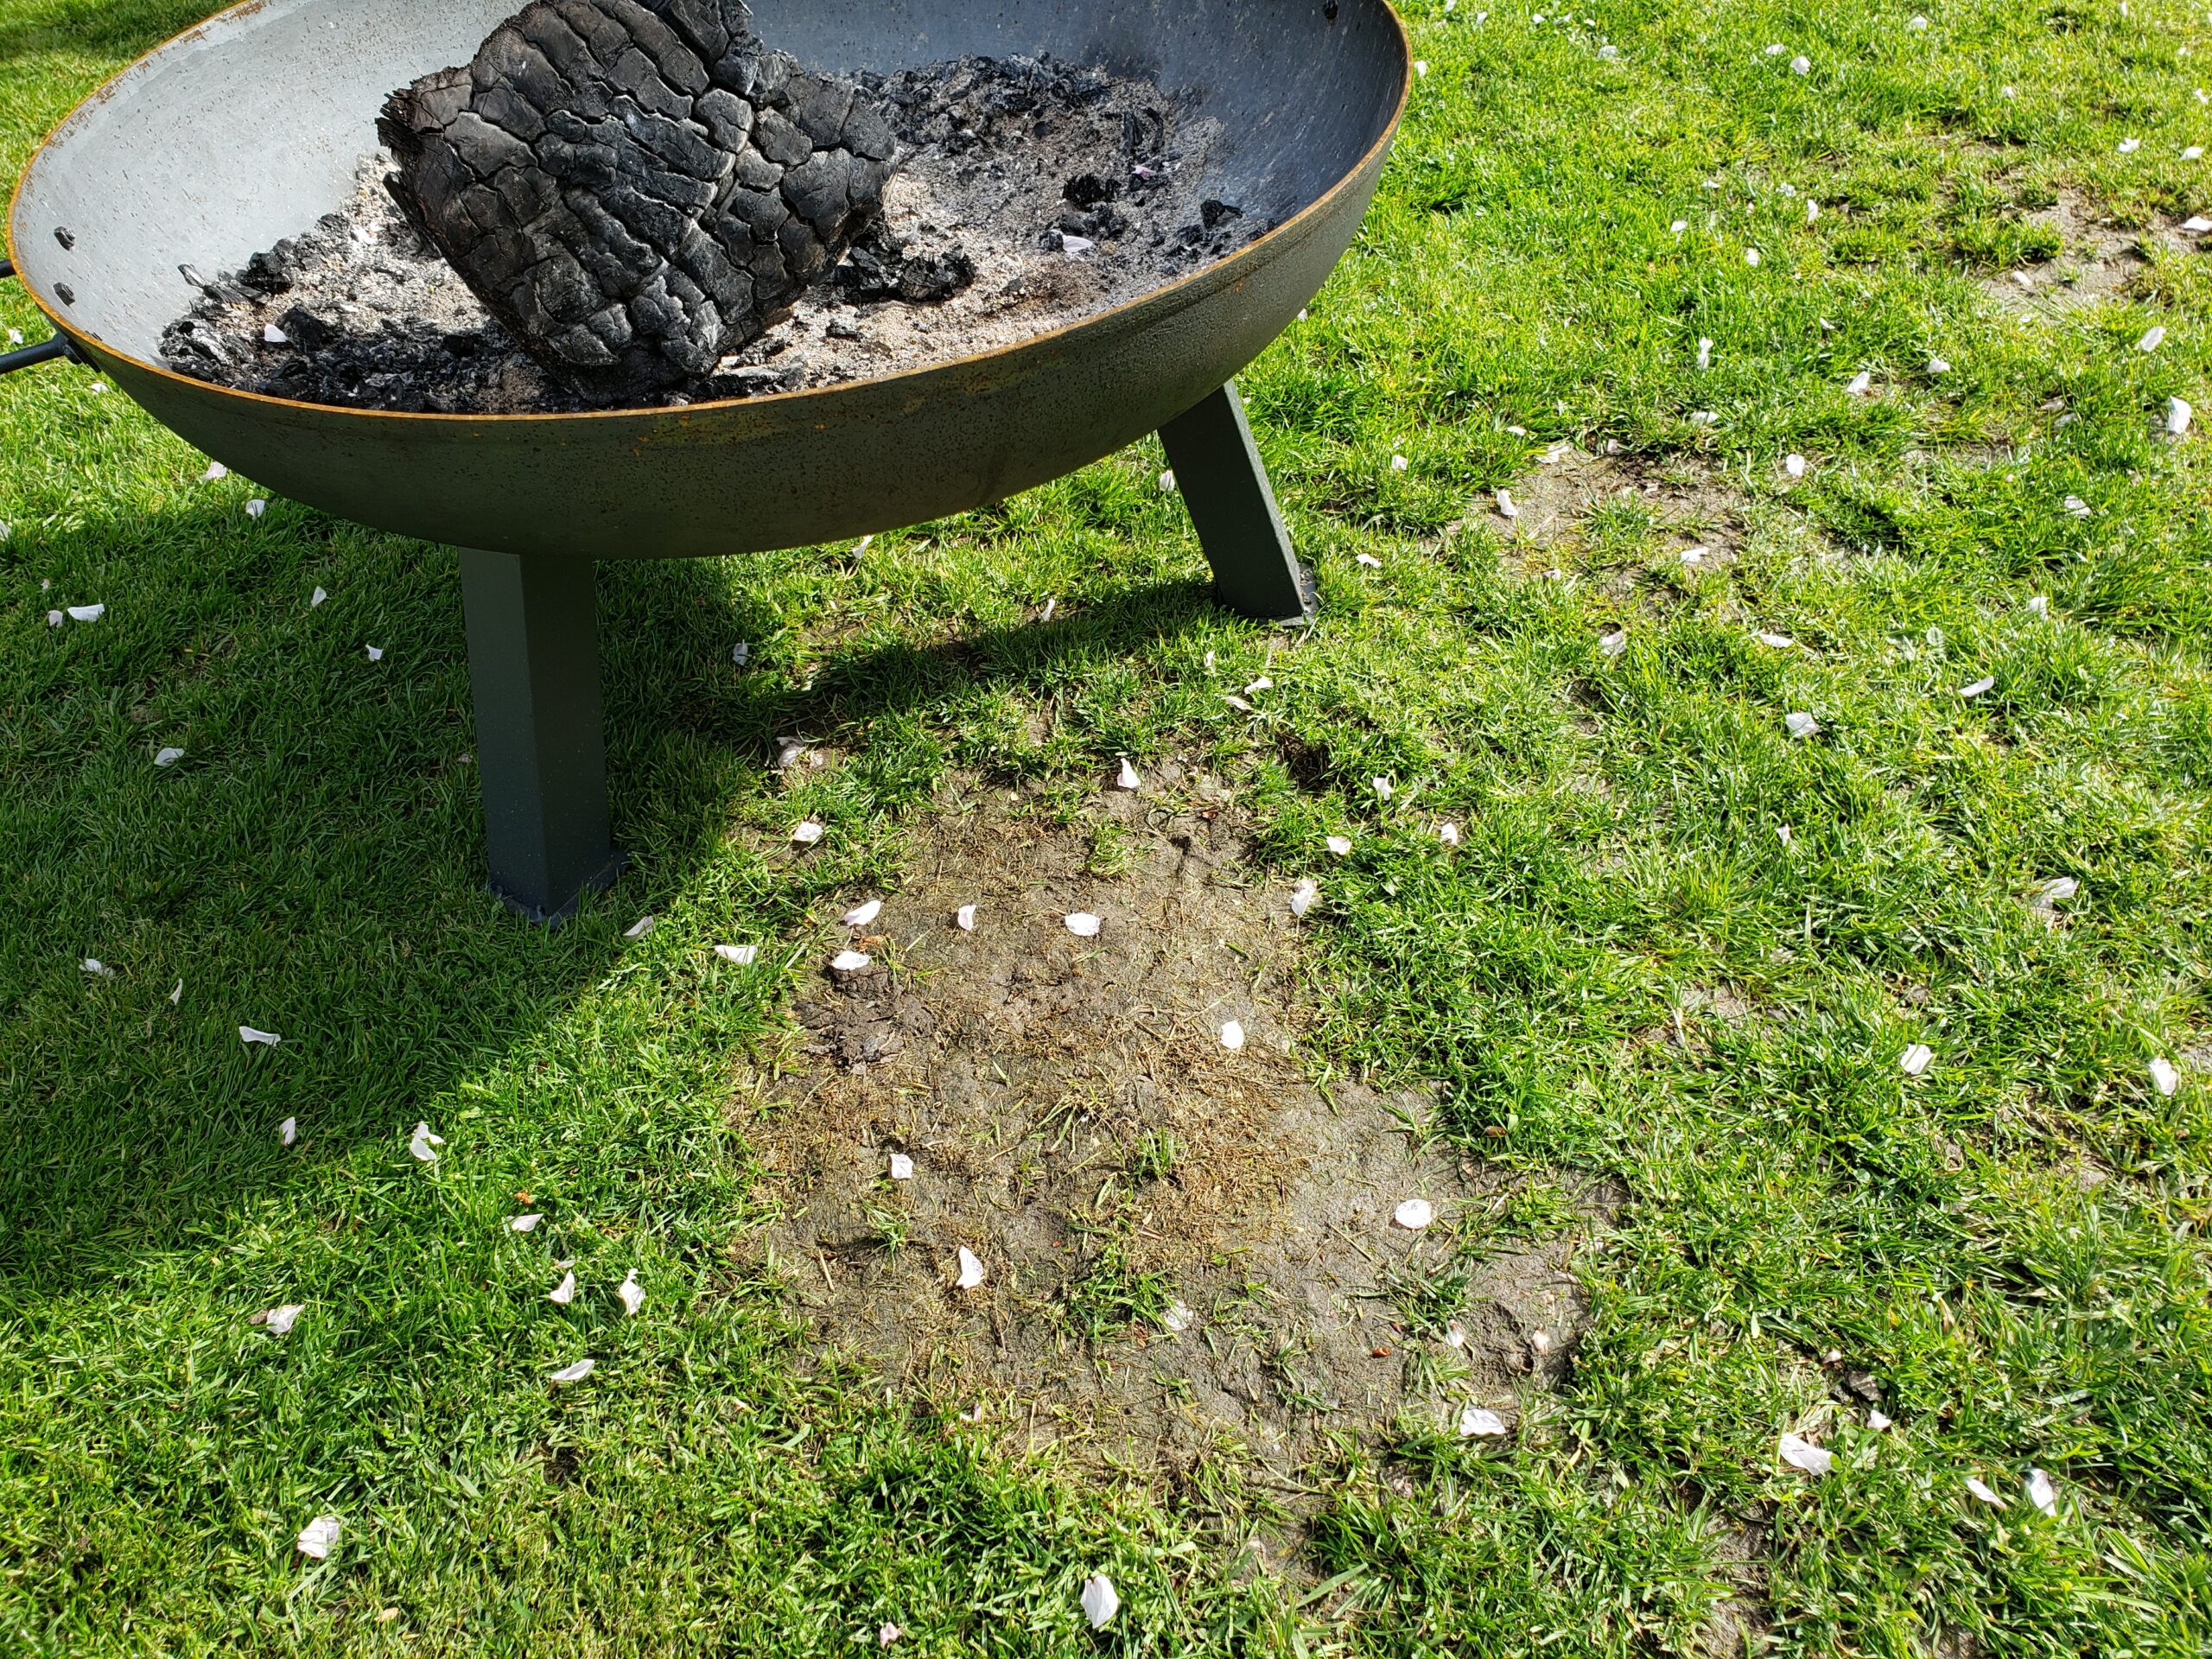 Fire Pit On Grass: 5 BEST Ways To Prevent Damage To Your Lawn